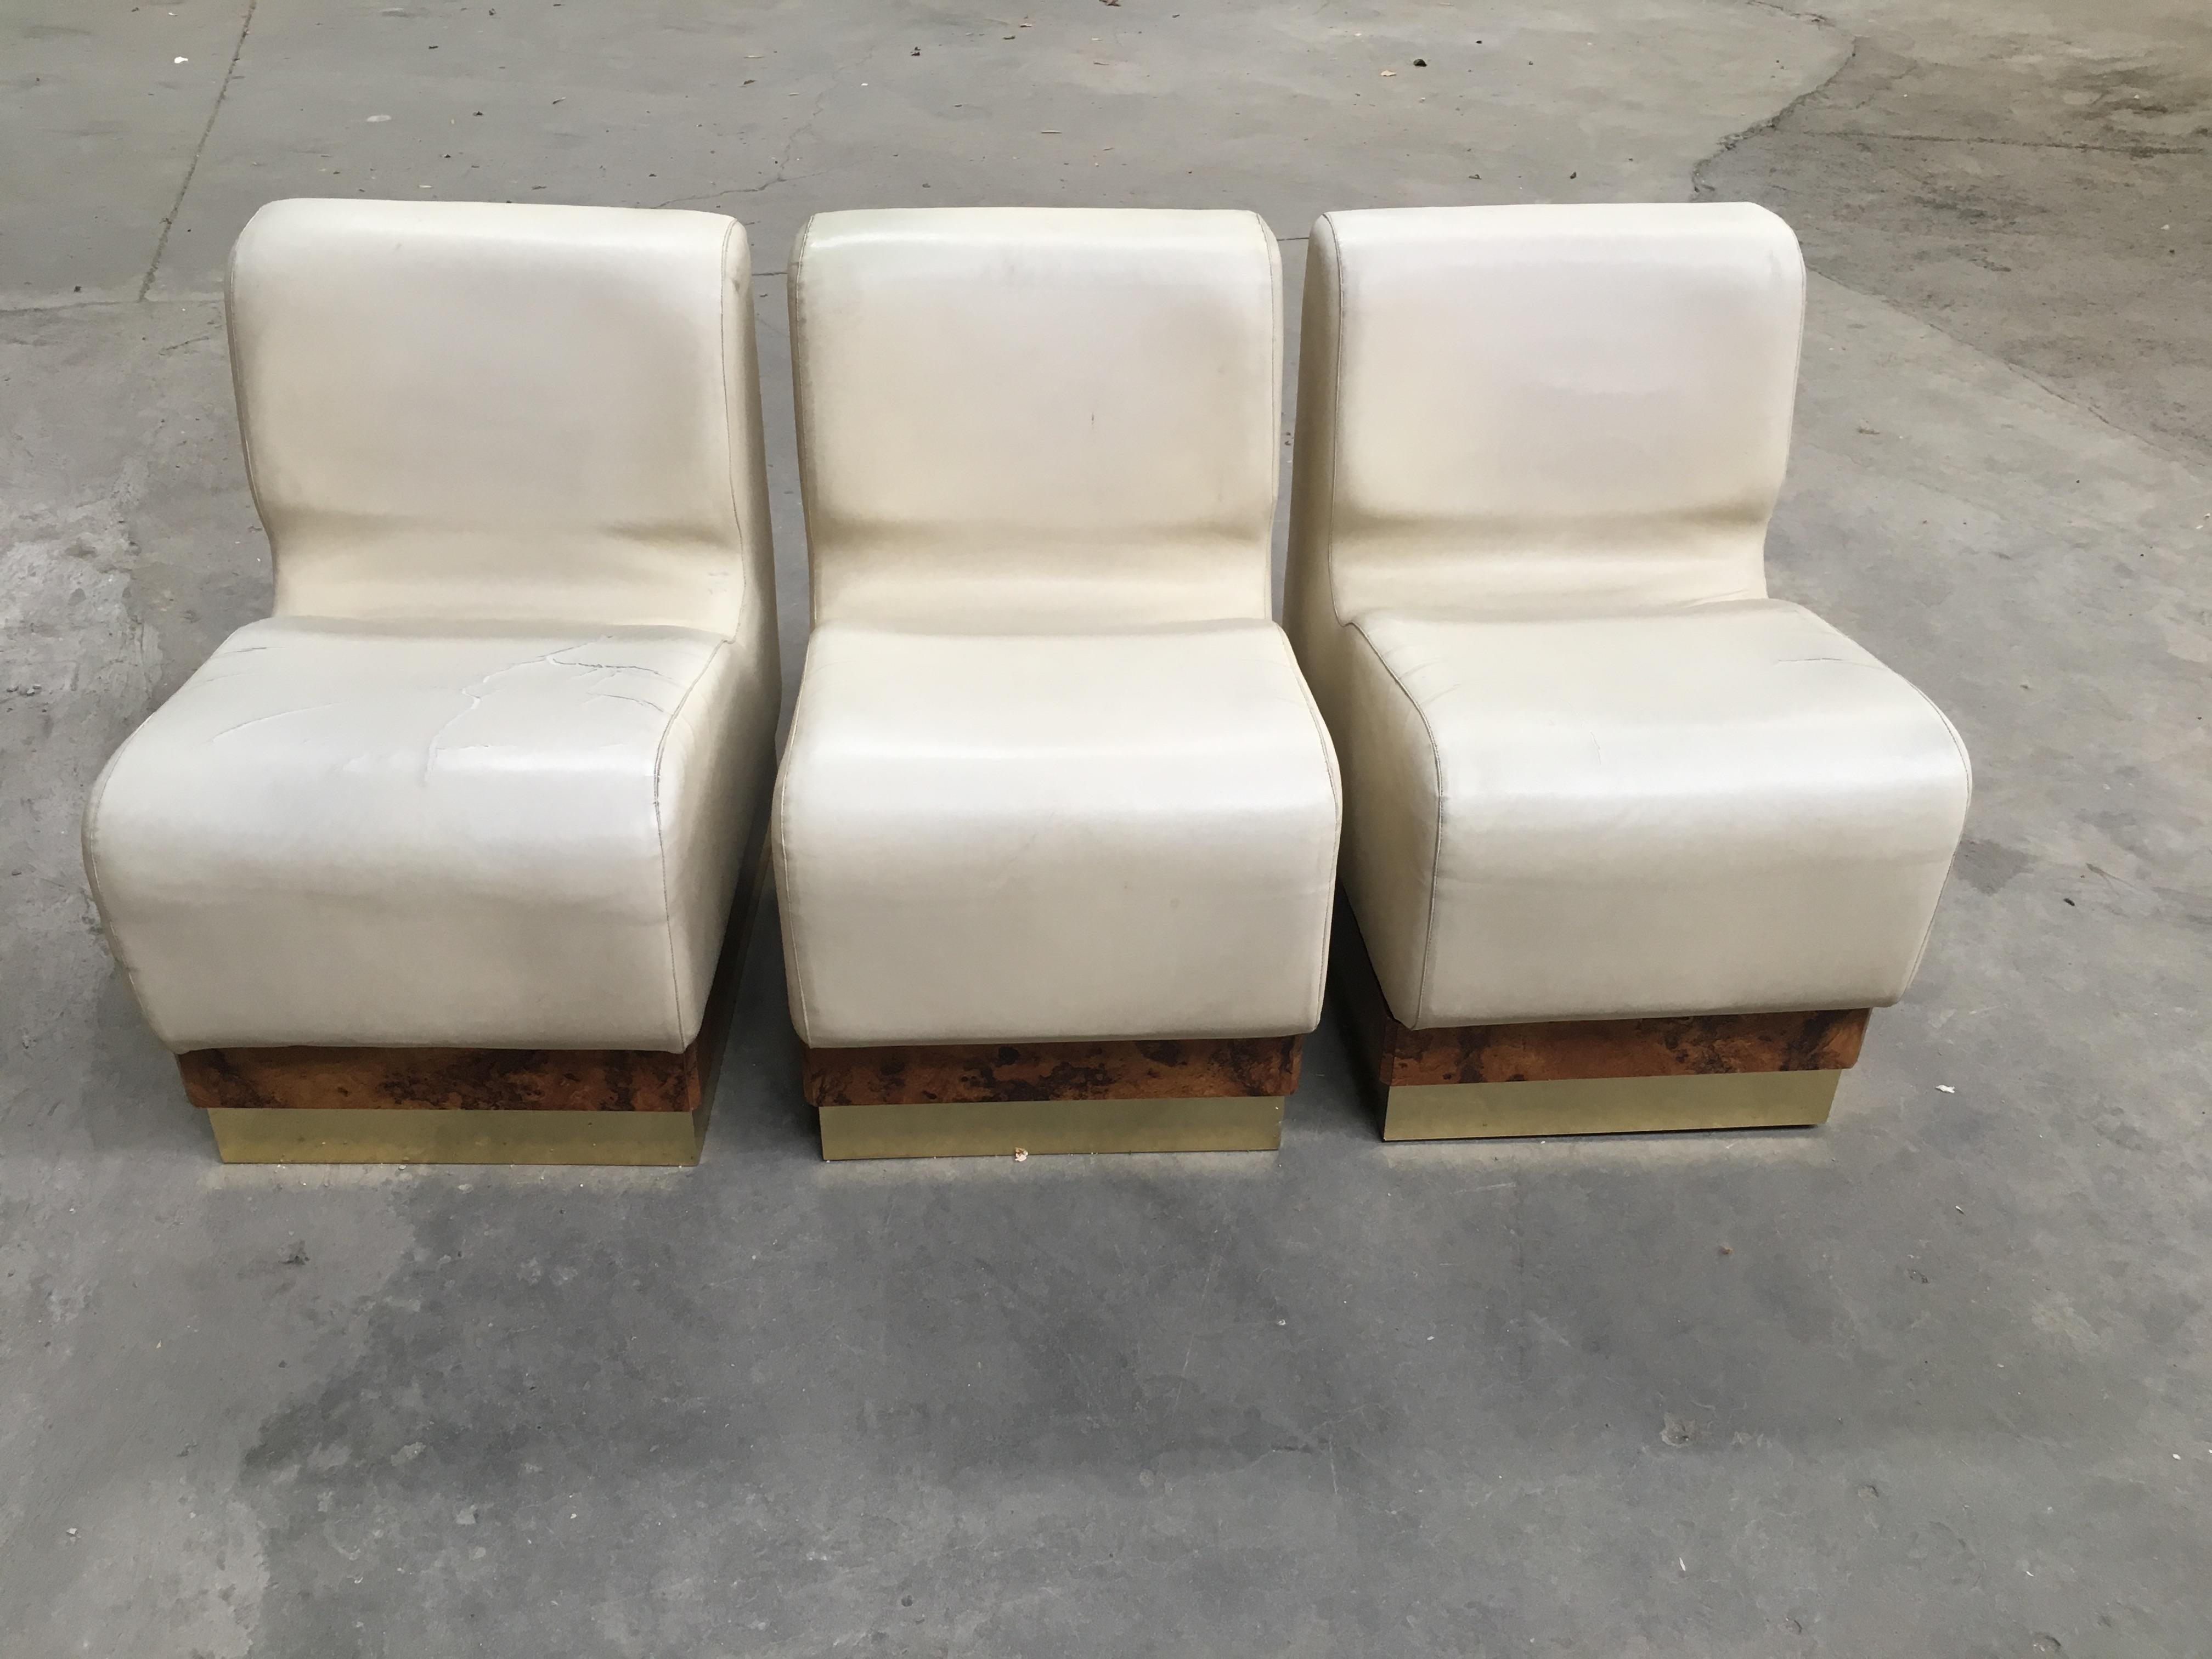 Brass Mid-Century Modern Italian Living Room Set Consisting in 3 Sectional Armchairs For Sale